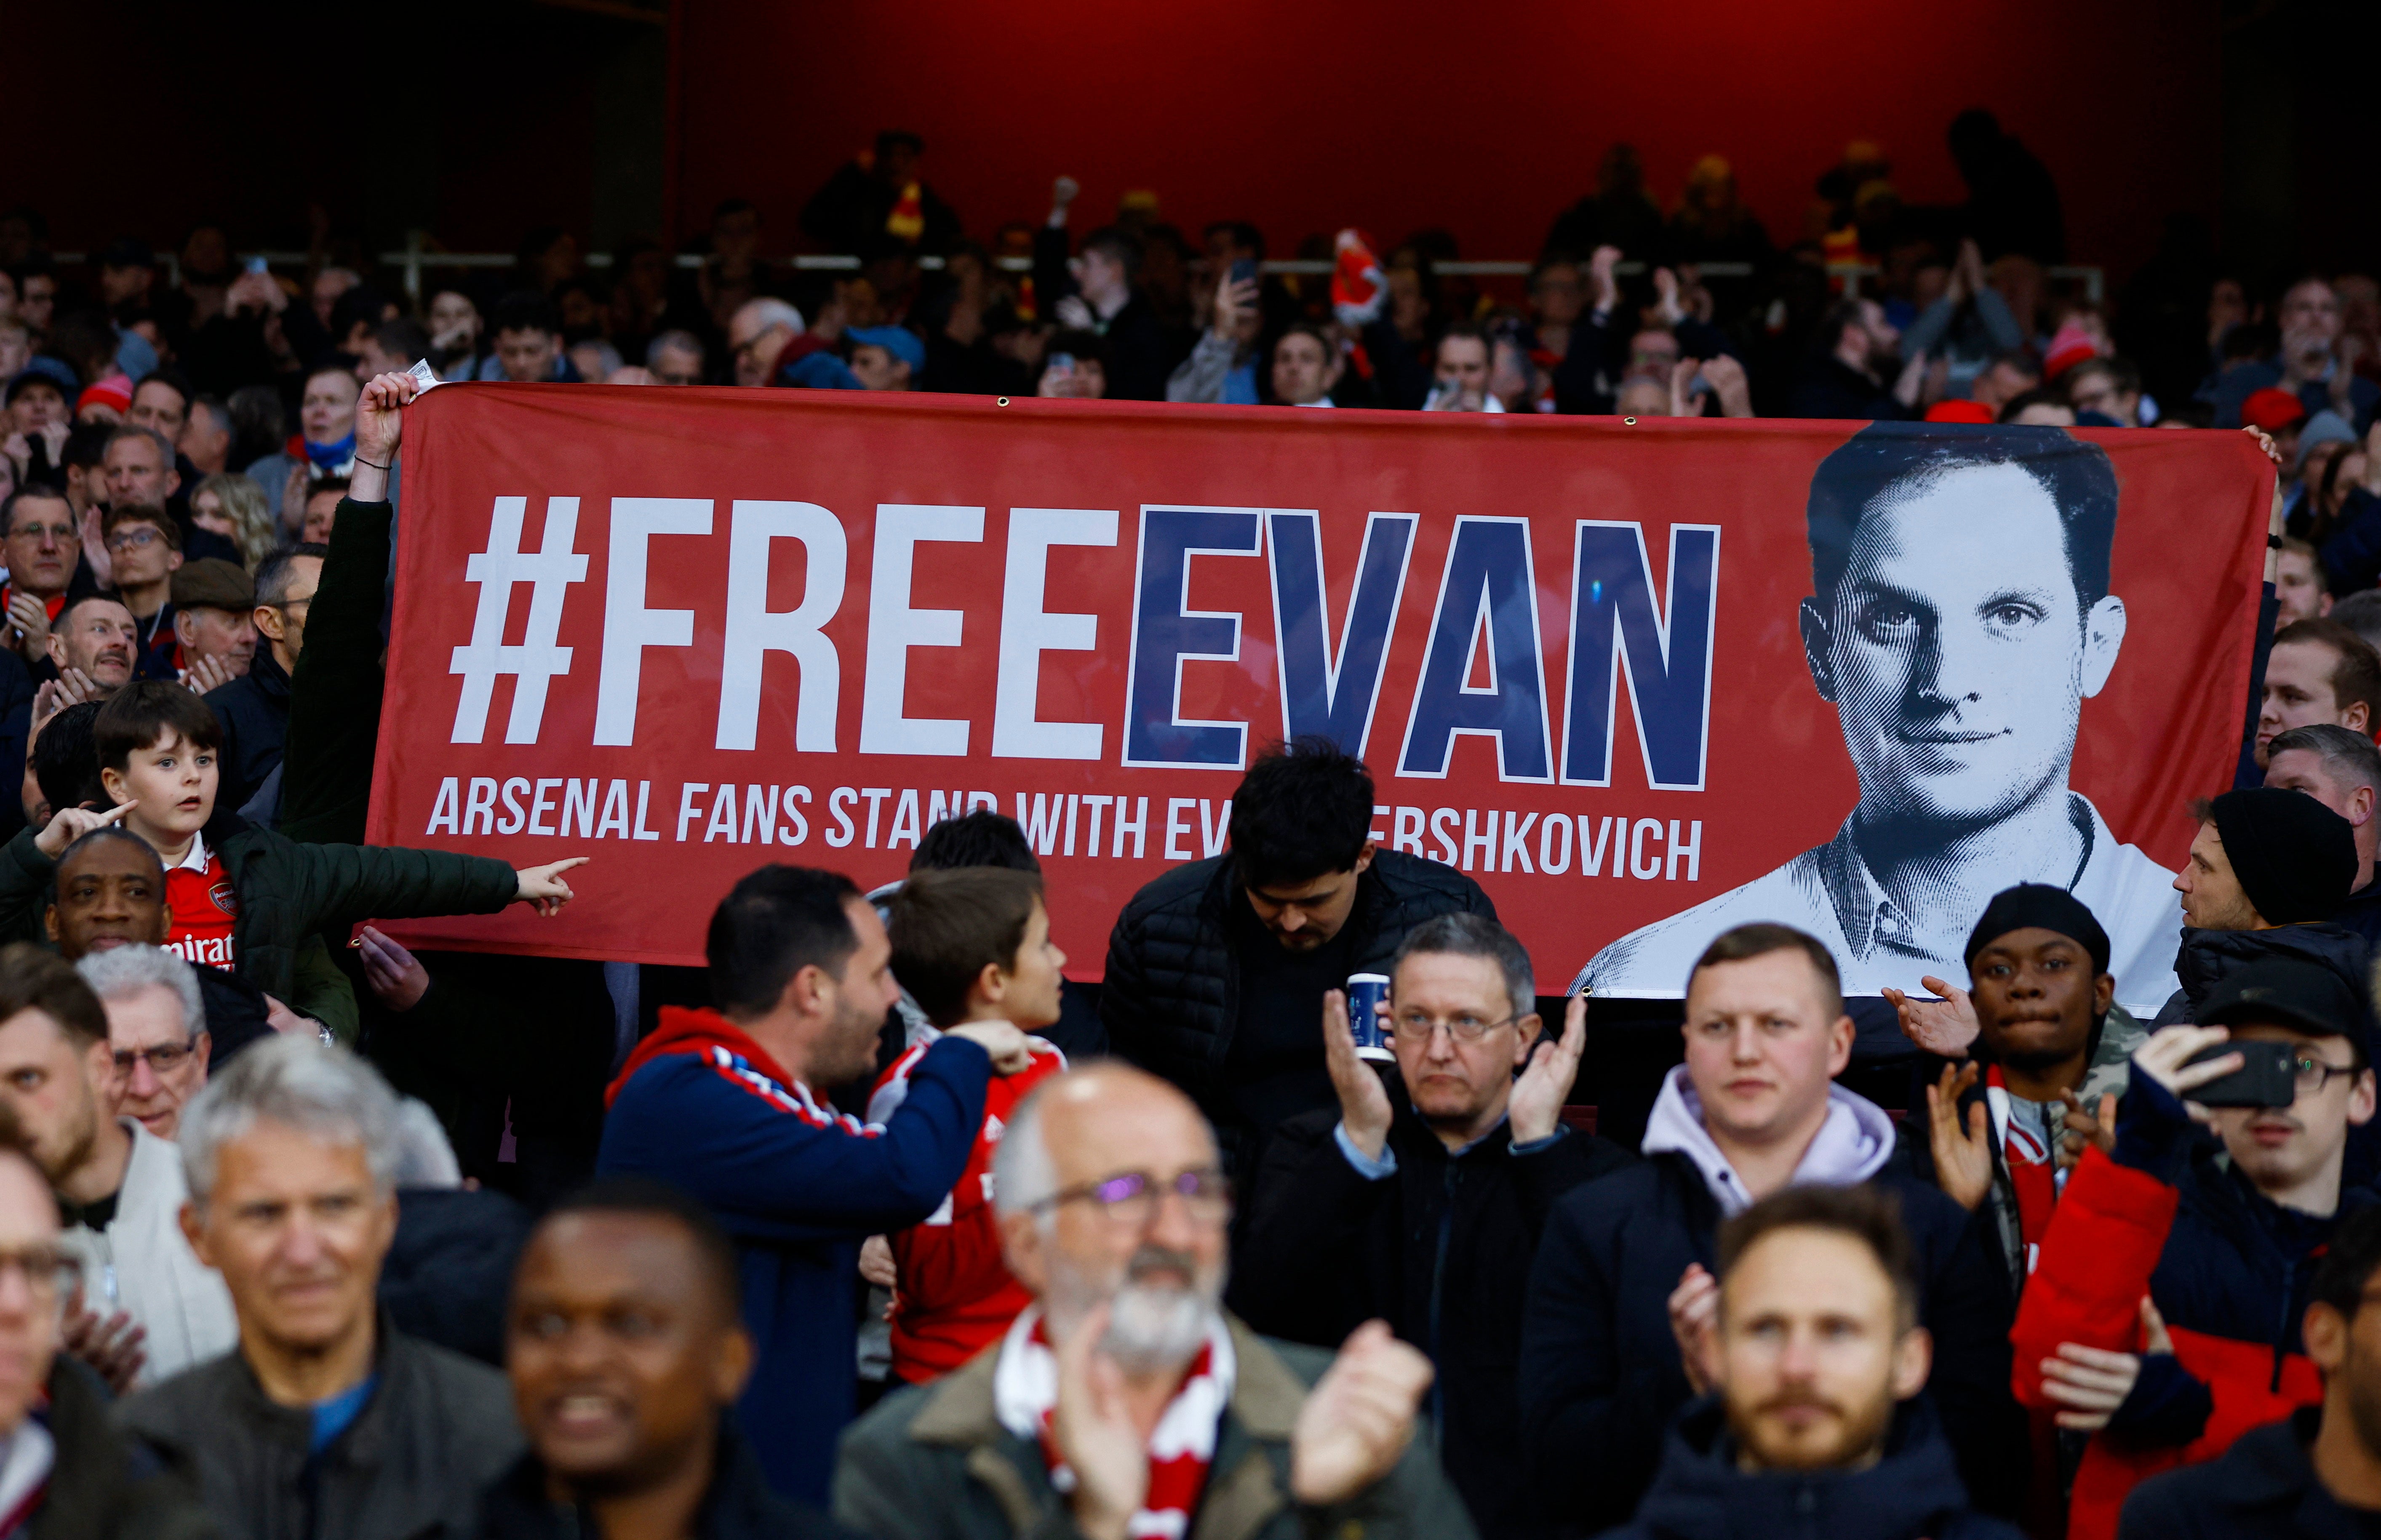 Arsenal fans display a banner at the match with Southampton